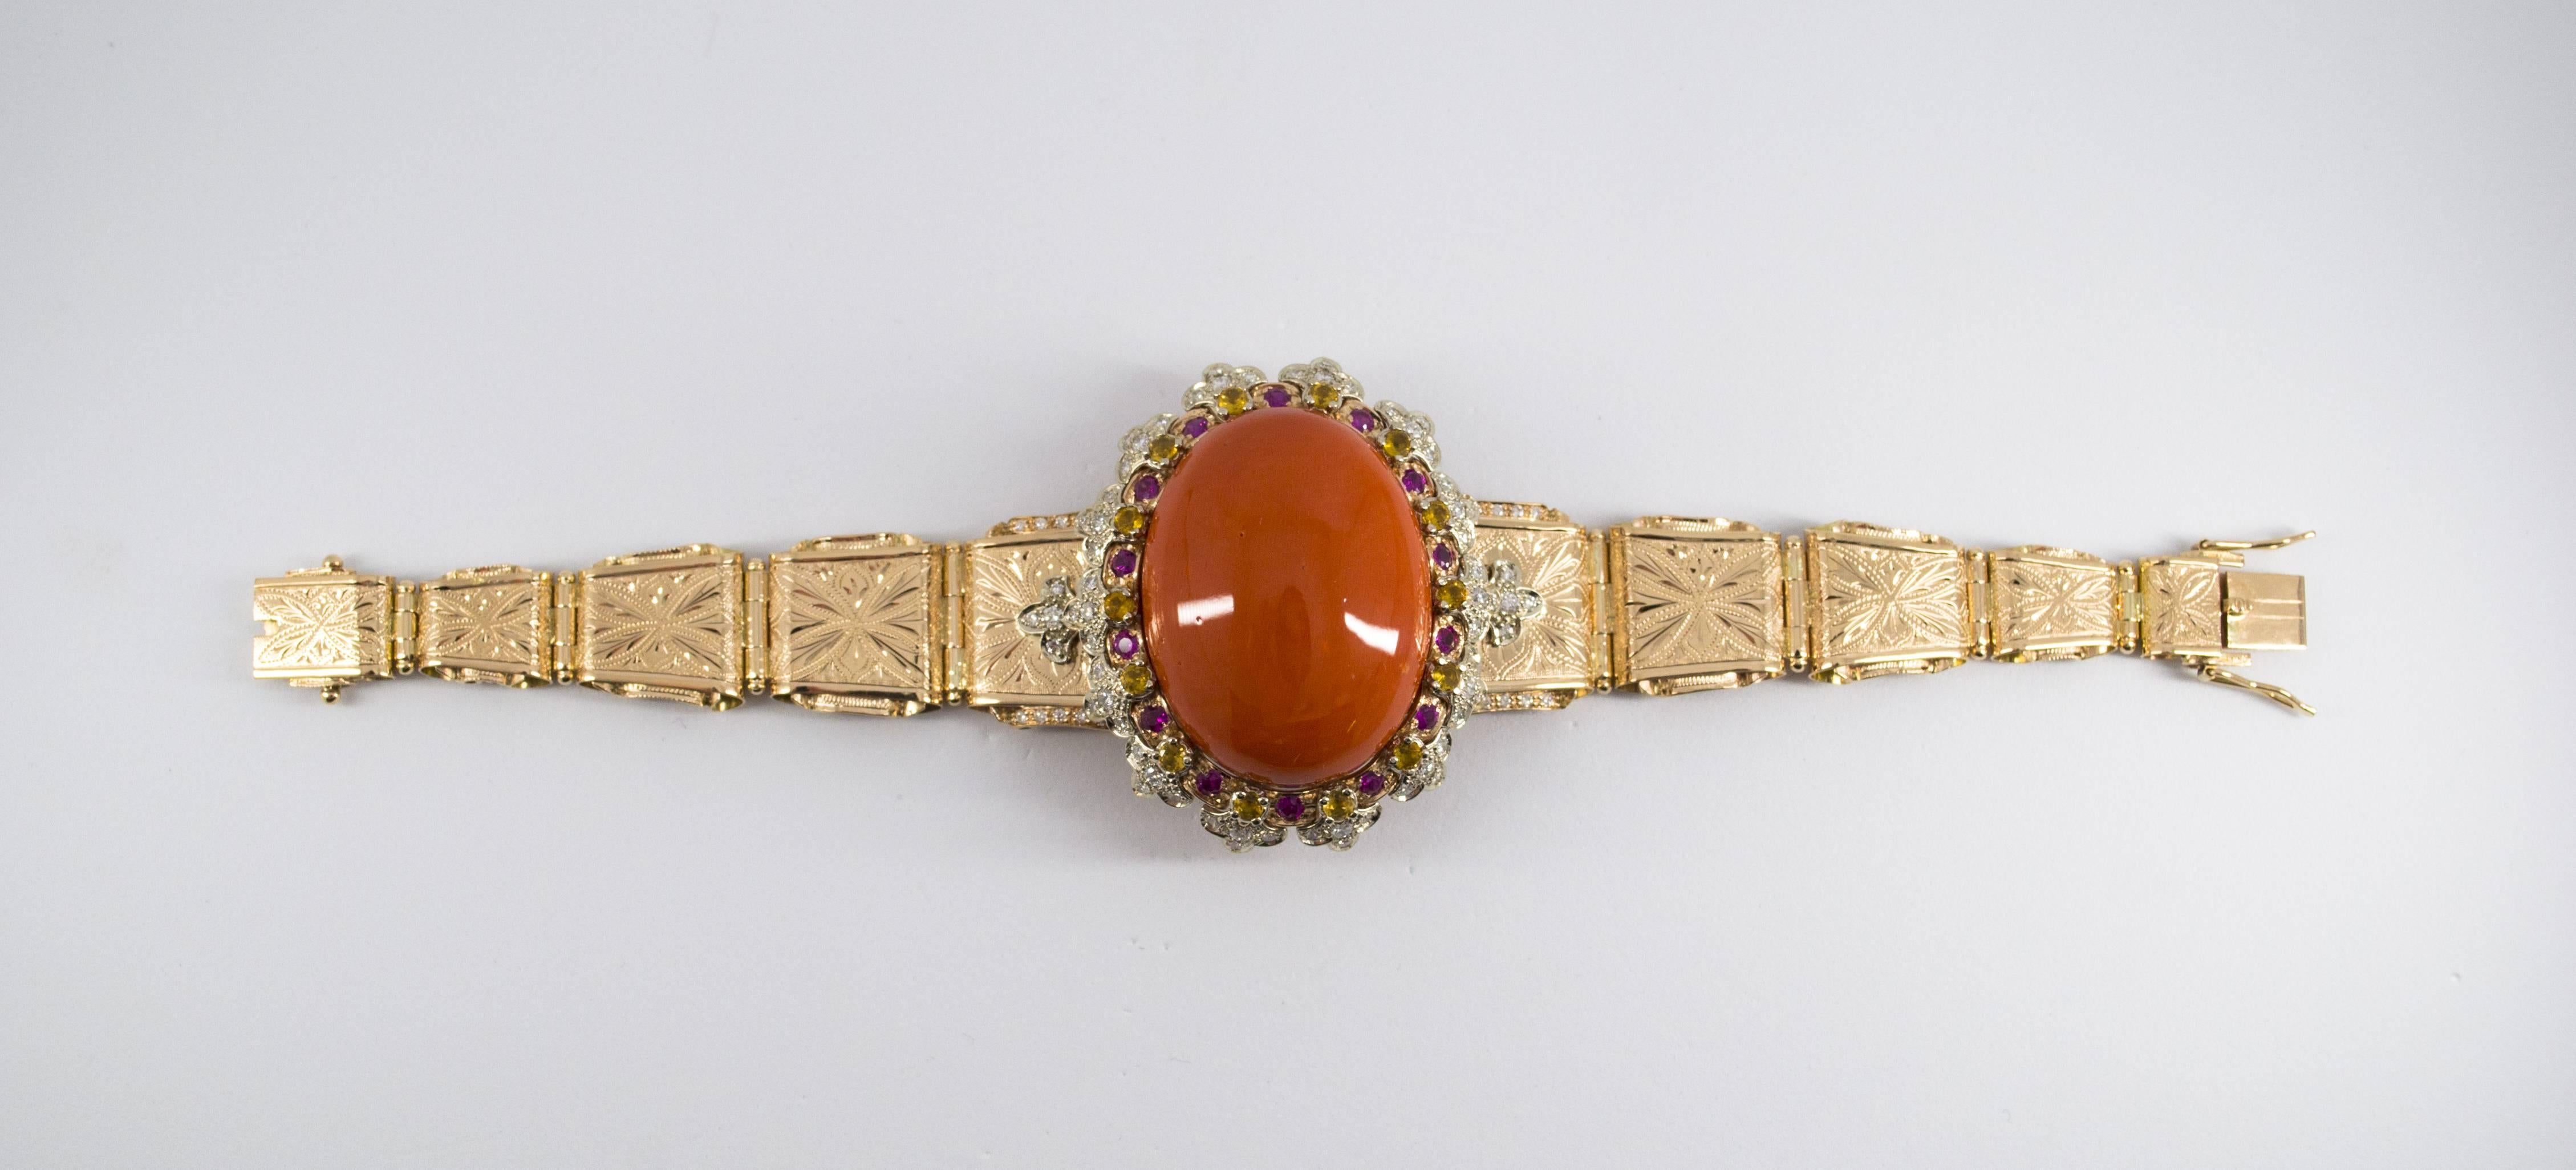 This Bracelet is made of 14K Yellow Gold.
This Bracelet has 1.70 Carats of Diamonds.
This Bracelet has 2.40 Carats of Rubies and Yellow Sapphires.
This Bracelet has also a big Red Mediterranean (Sardinia, Italy) Coral.
We're a workshop so every